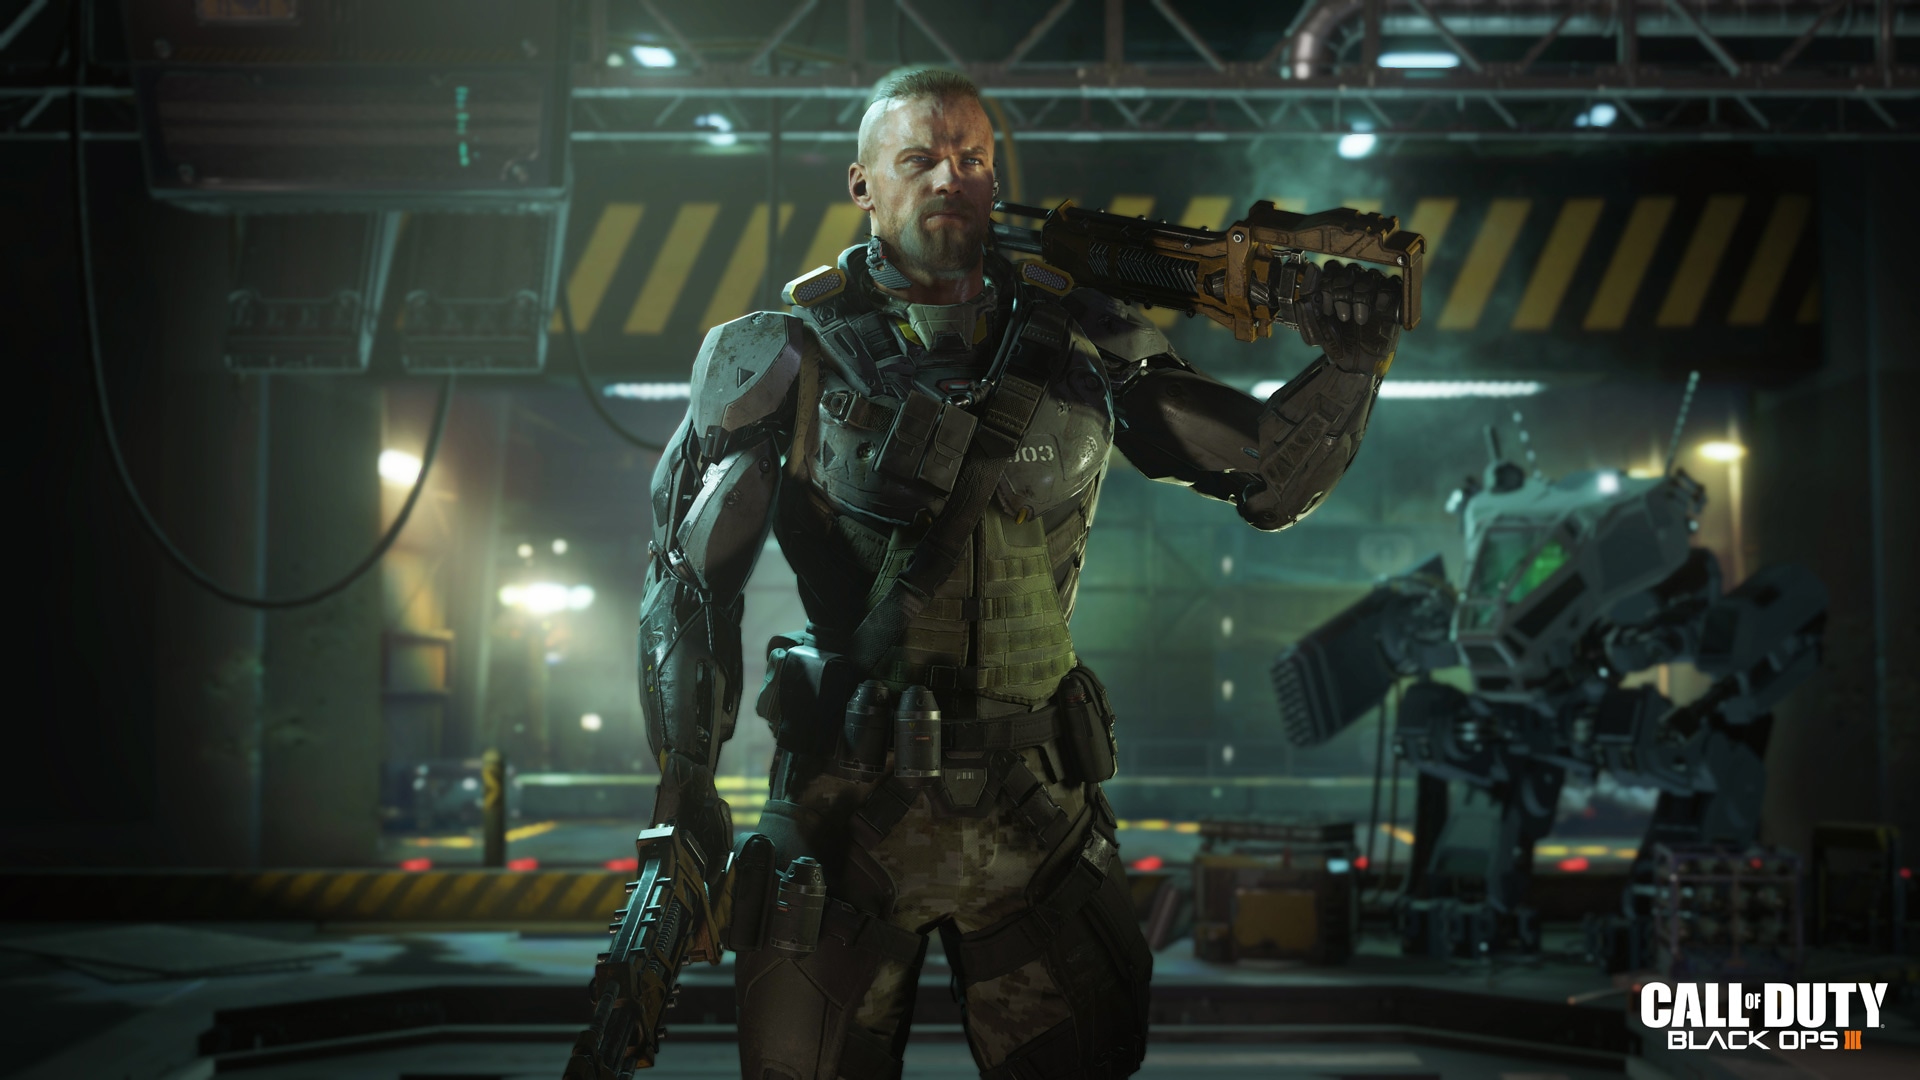 “Black Ops III” Will Have Modding/Mapping Tools for PC 2016 - Oh, What Glorious Ways to Mod CoD